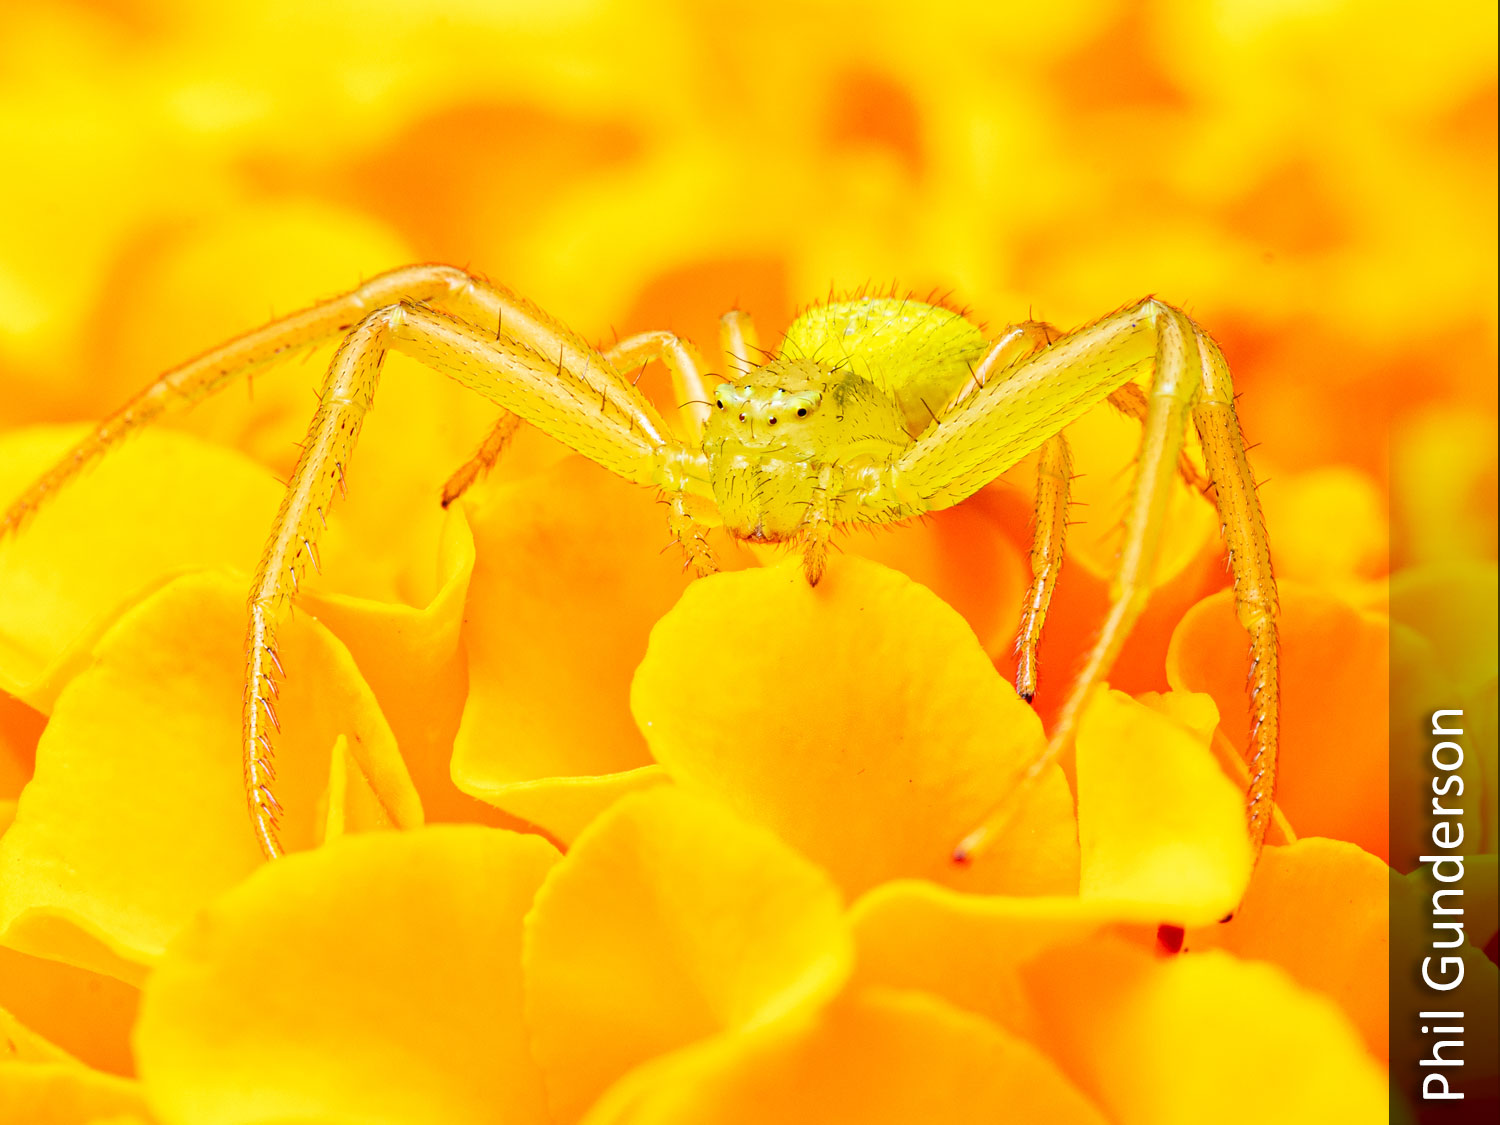 White-banded crab spider